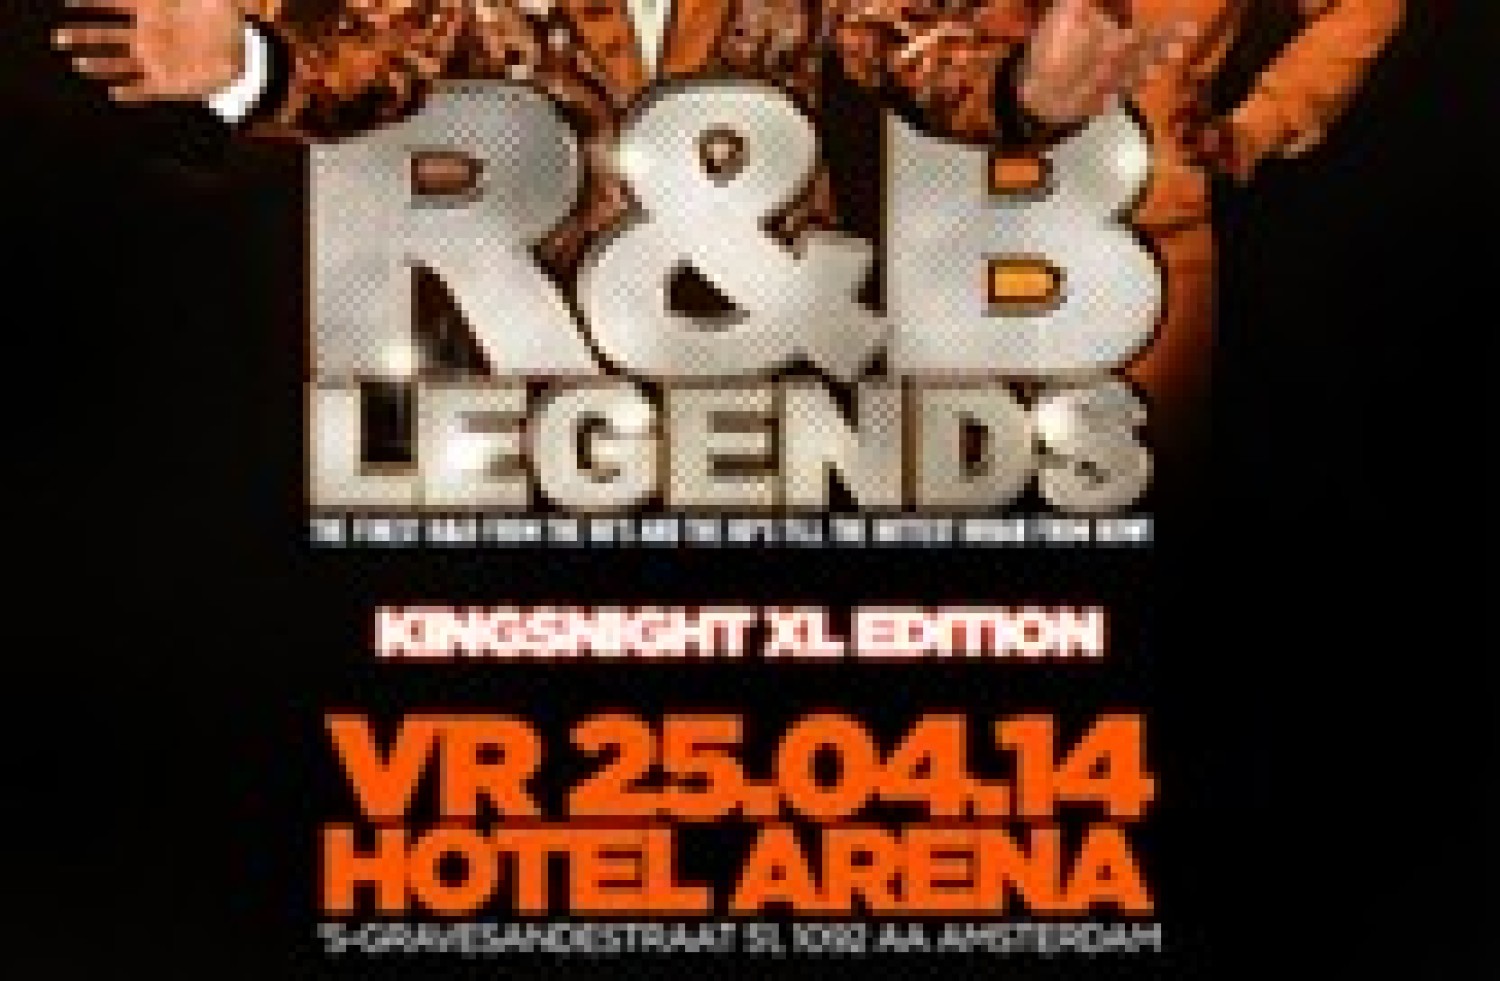 Party nieuws: R&B Legends, Kingsnight XL, 25 april in Hotel Arena